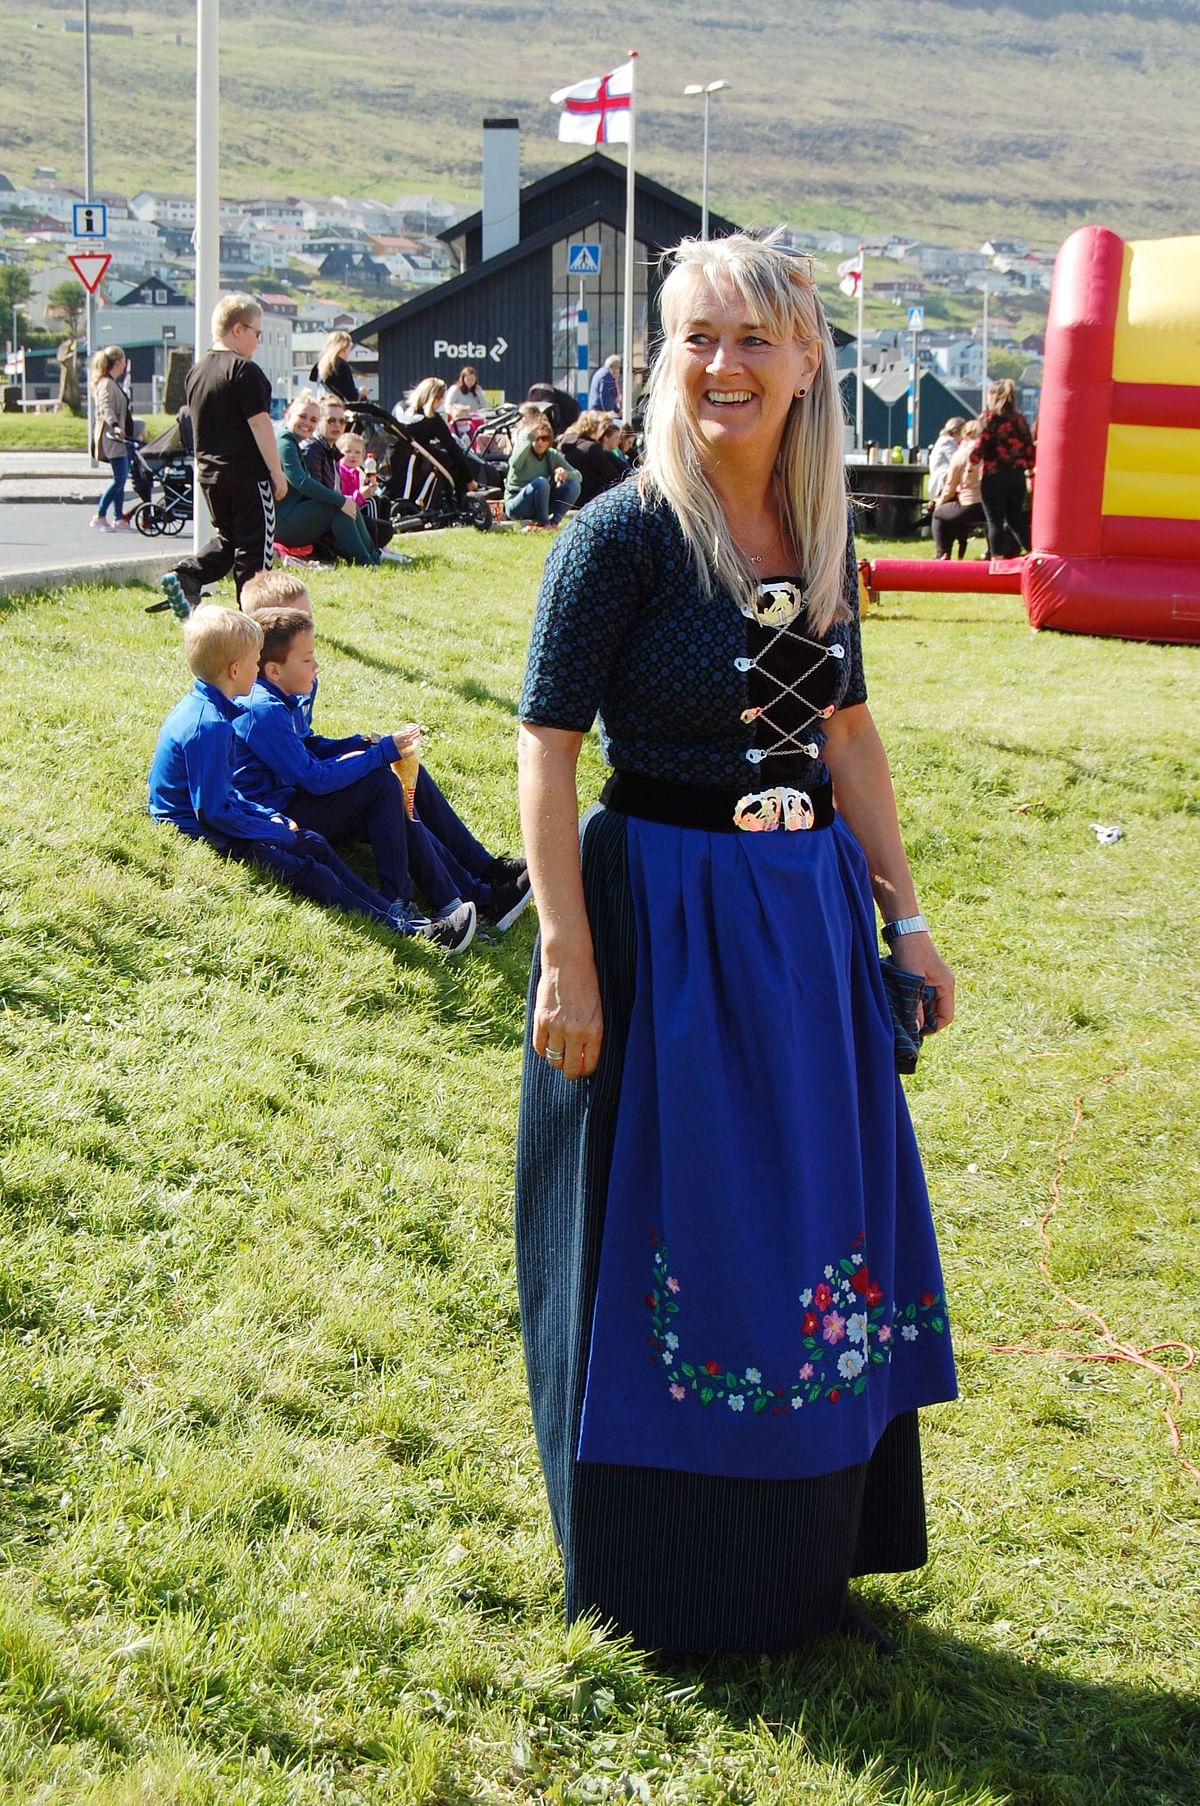 A woman poses on 3 June 2018 in a traditional Faroese outfit during a festival in Klaksvík, on the island of Borooy, one of the Faroe Islands located between the North Atlantic Ocean and Norwegian Sea. Photo: AFP